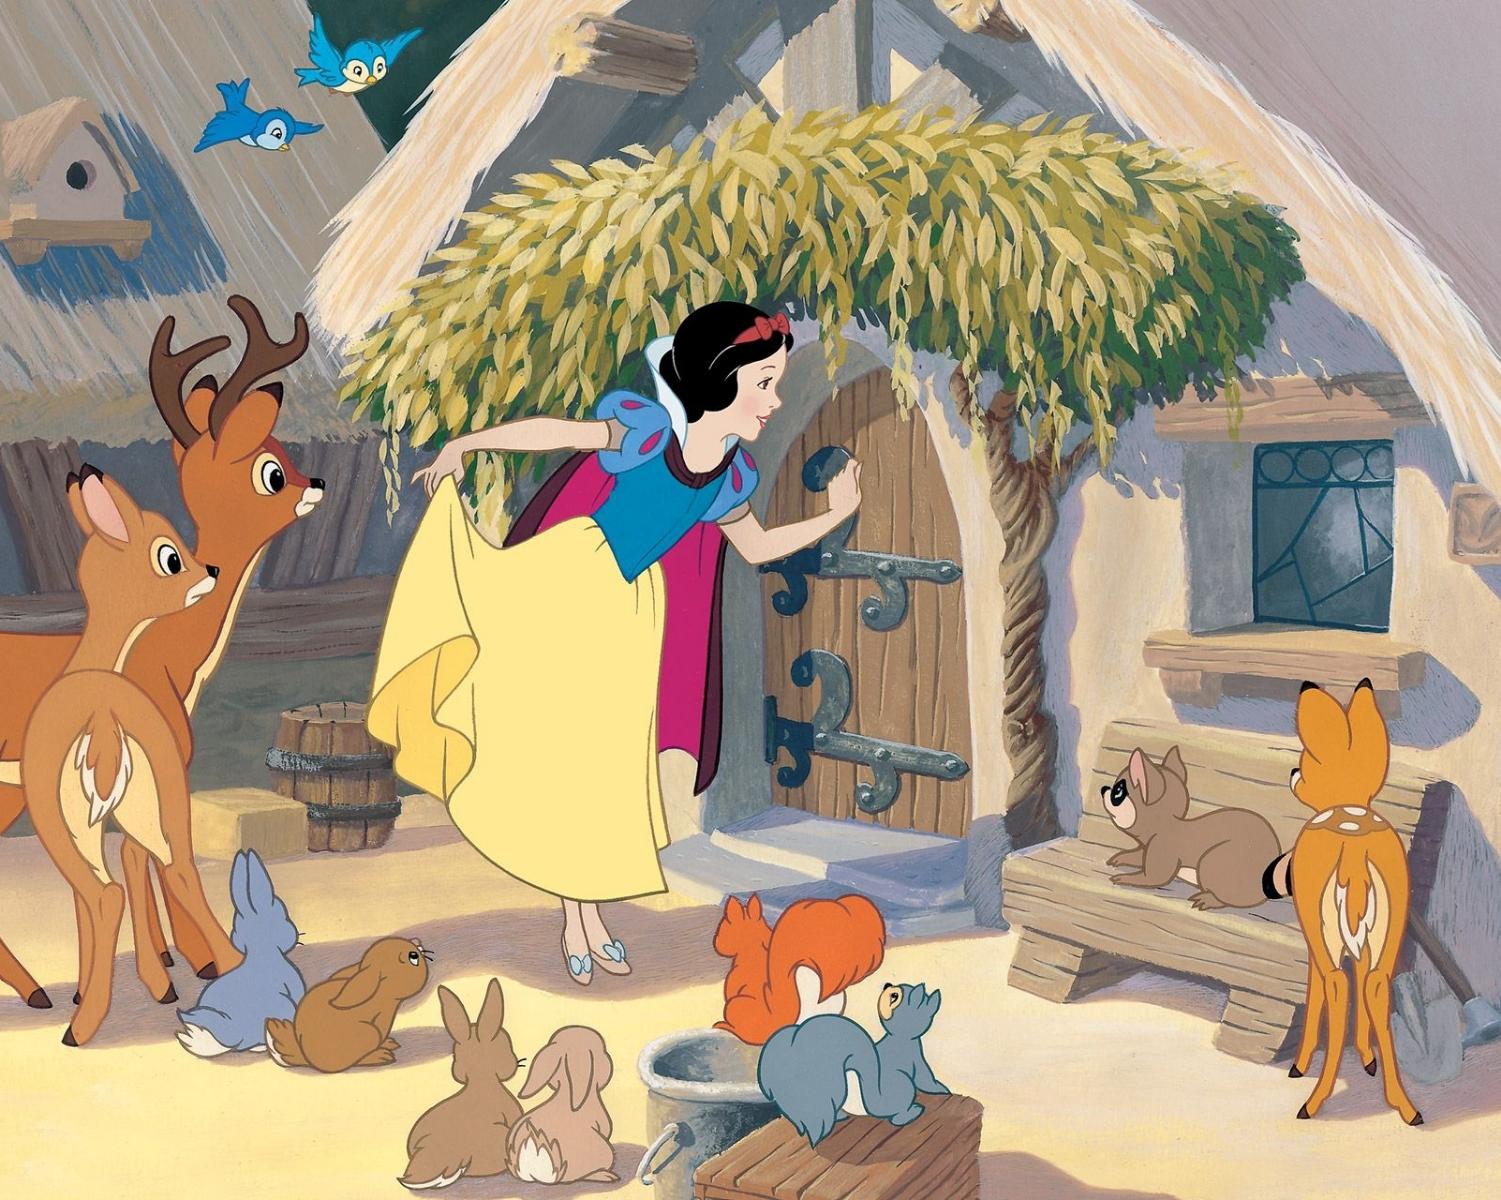 Snow White And The Seven Dwarfs Story. 